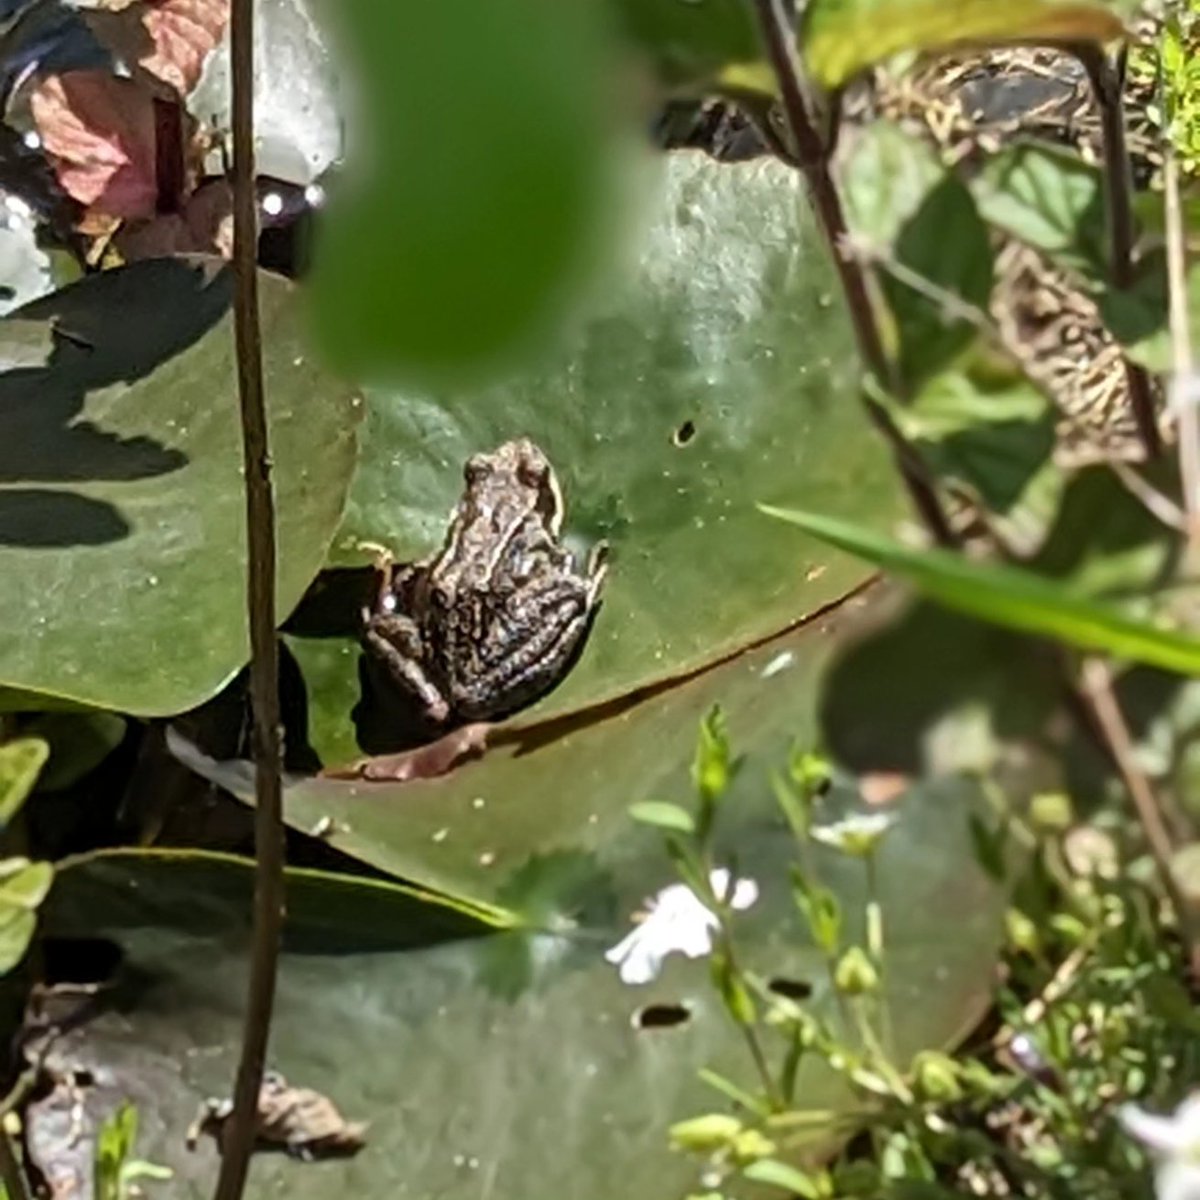 Another busy day at the allotment yesterday but spent our coffee breaks watching this little one sunbathing
#frogs
#allotmentlife
#norfolkwriterslife